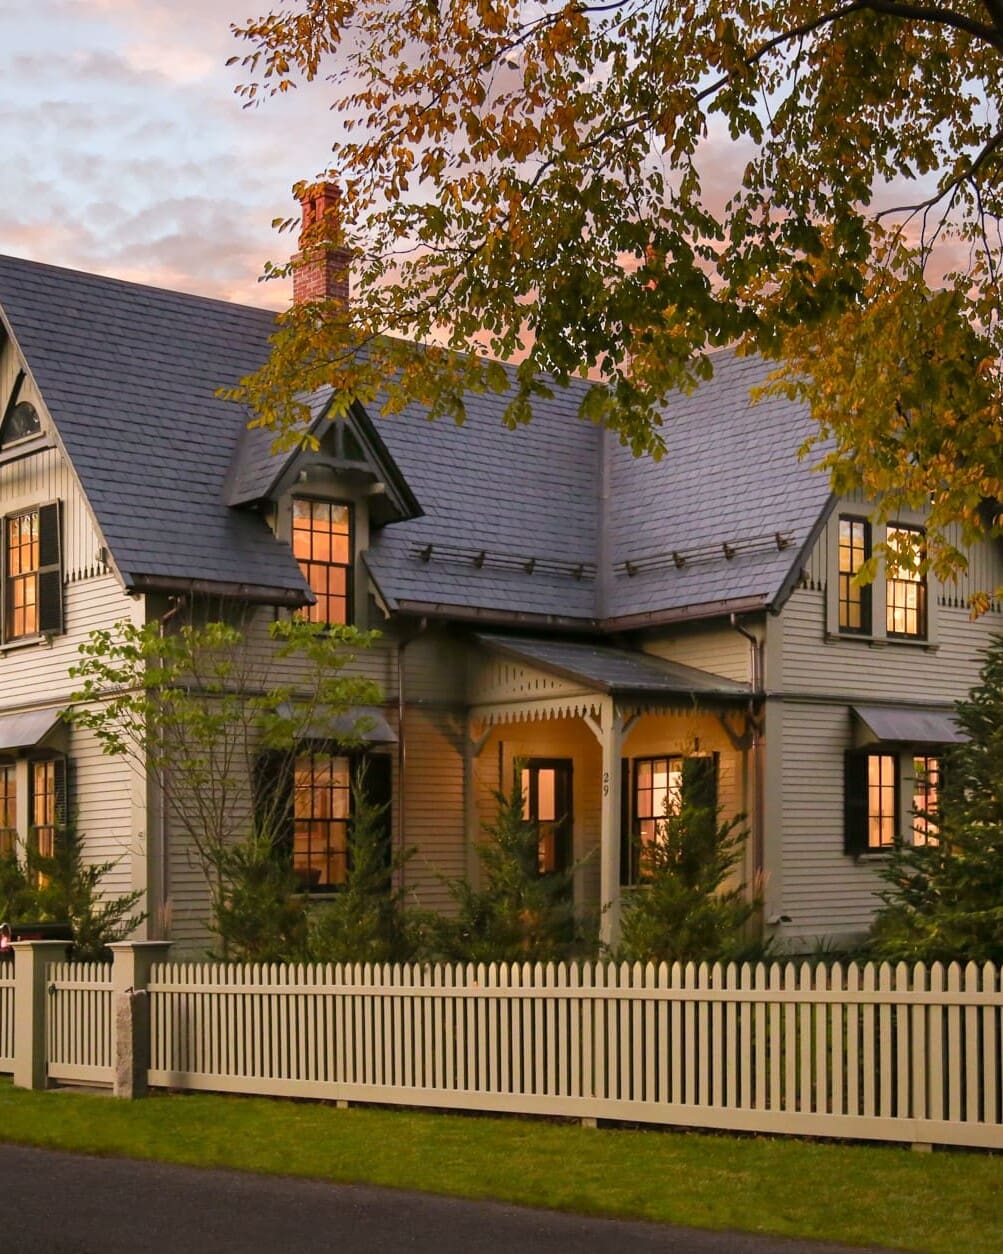 A photo of a house with grey-green painted siding and fence, with stone shingle roofing, antique black gable brackets, and painted colonial detailing.